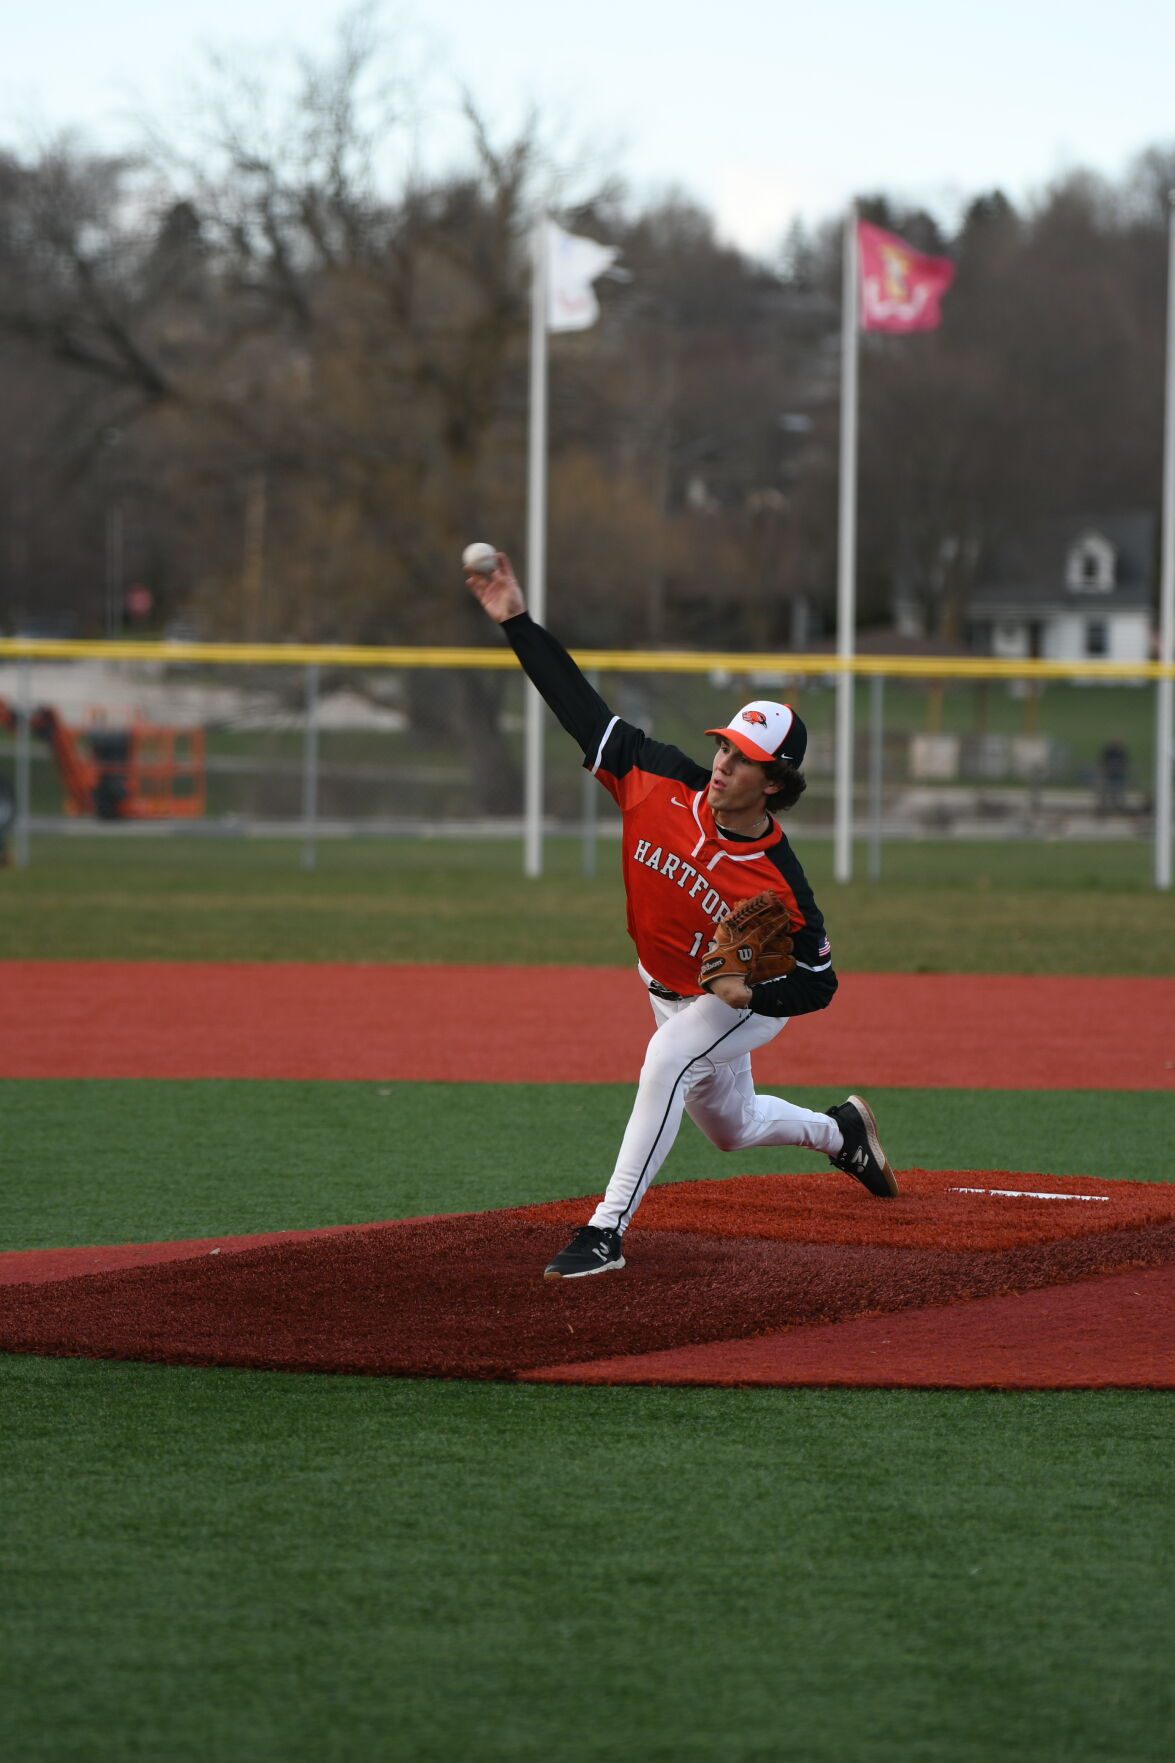 Hartford Union Dominates with Pitching Depth Against West Bend West: Orioles On a Winning Streak